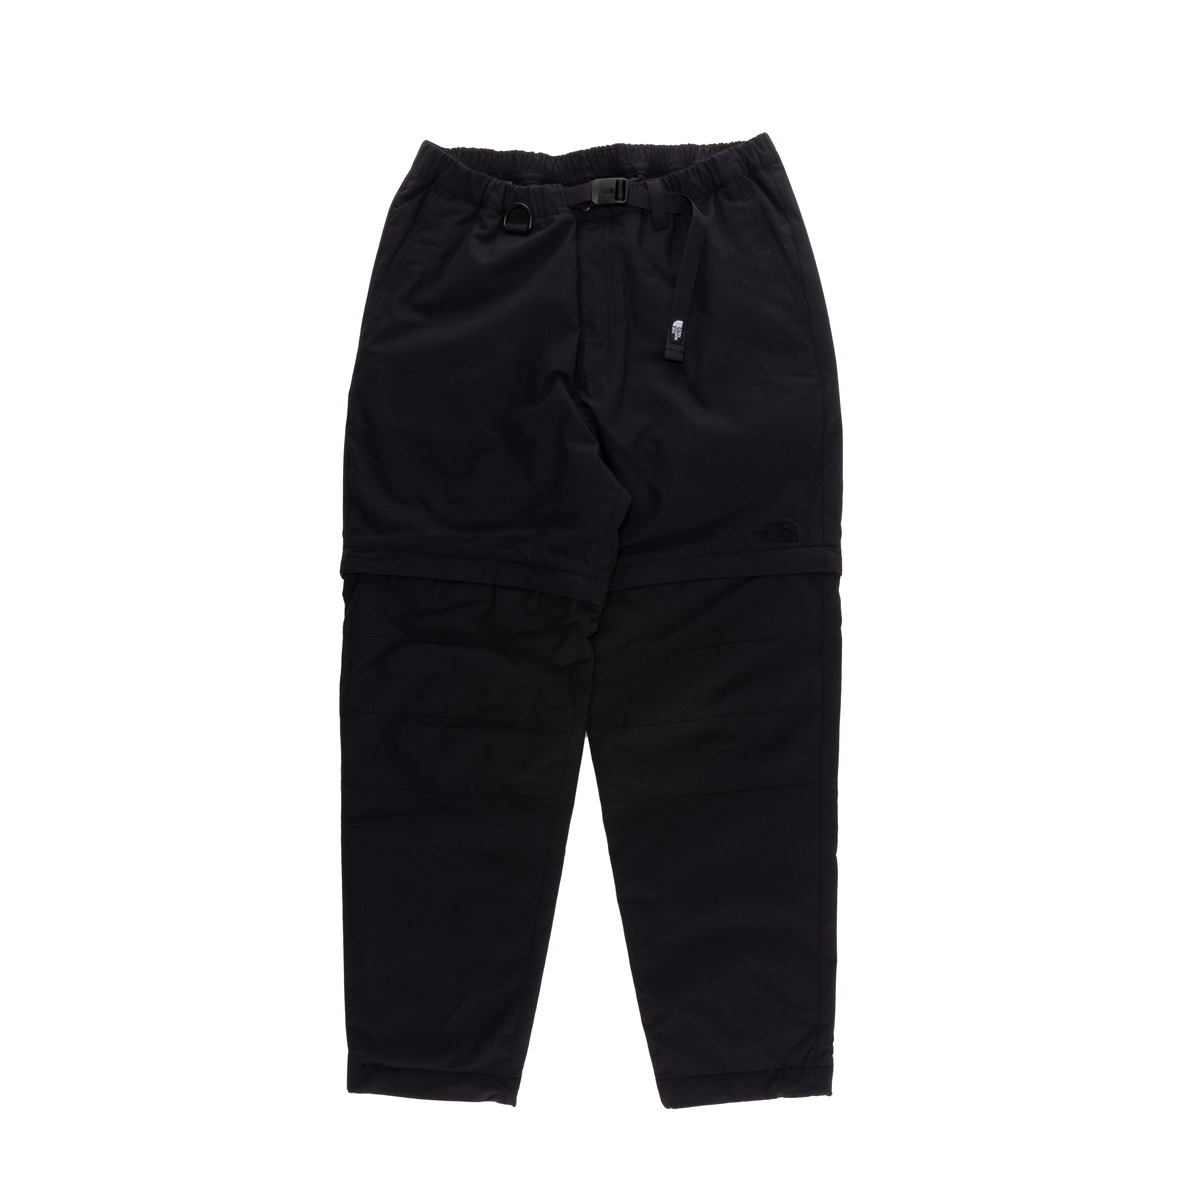 THE NORTH FACE】(ノースフェイス) Firefly Insulated Pant